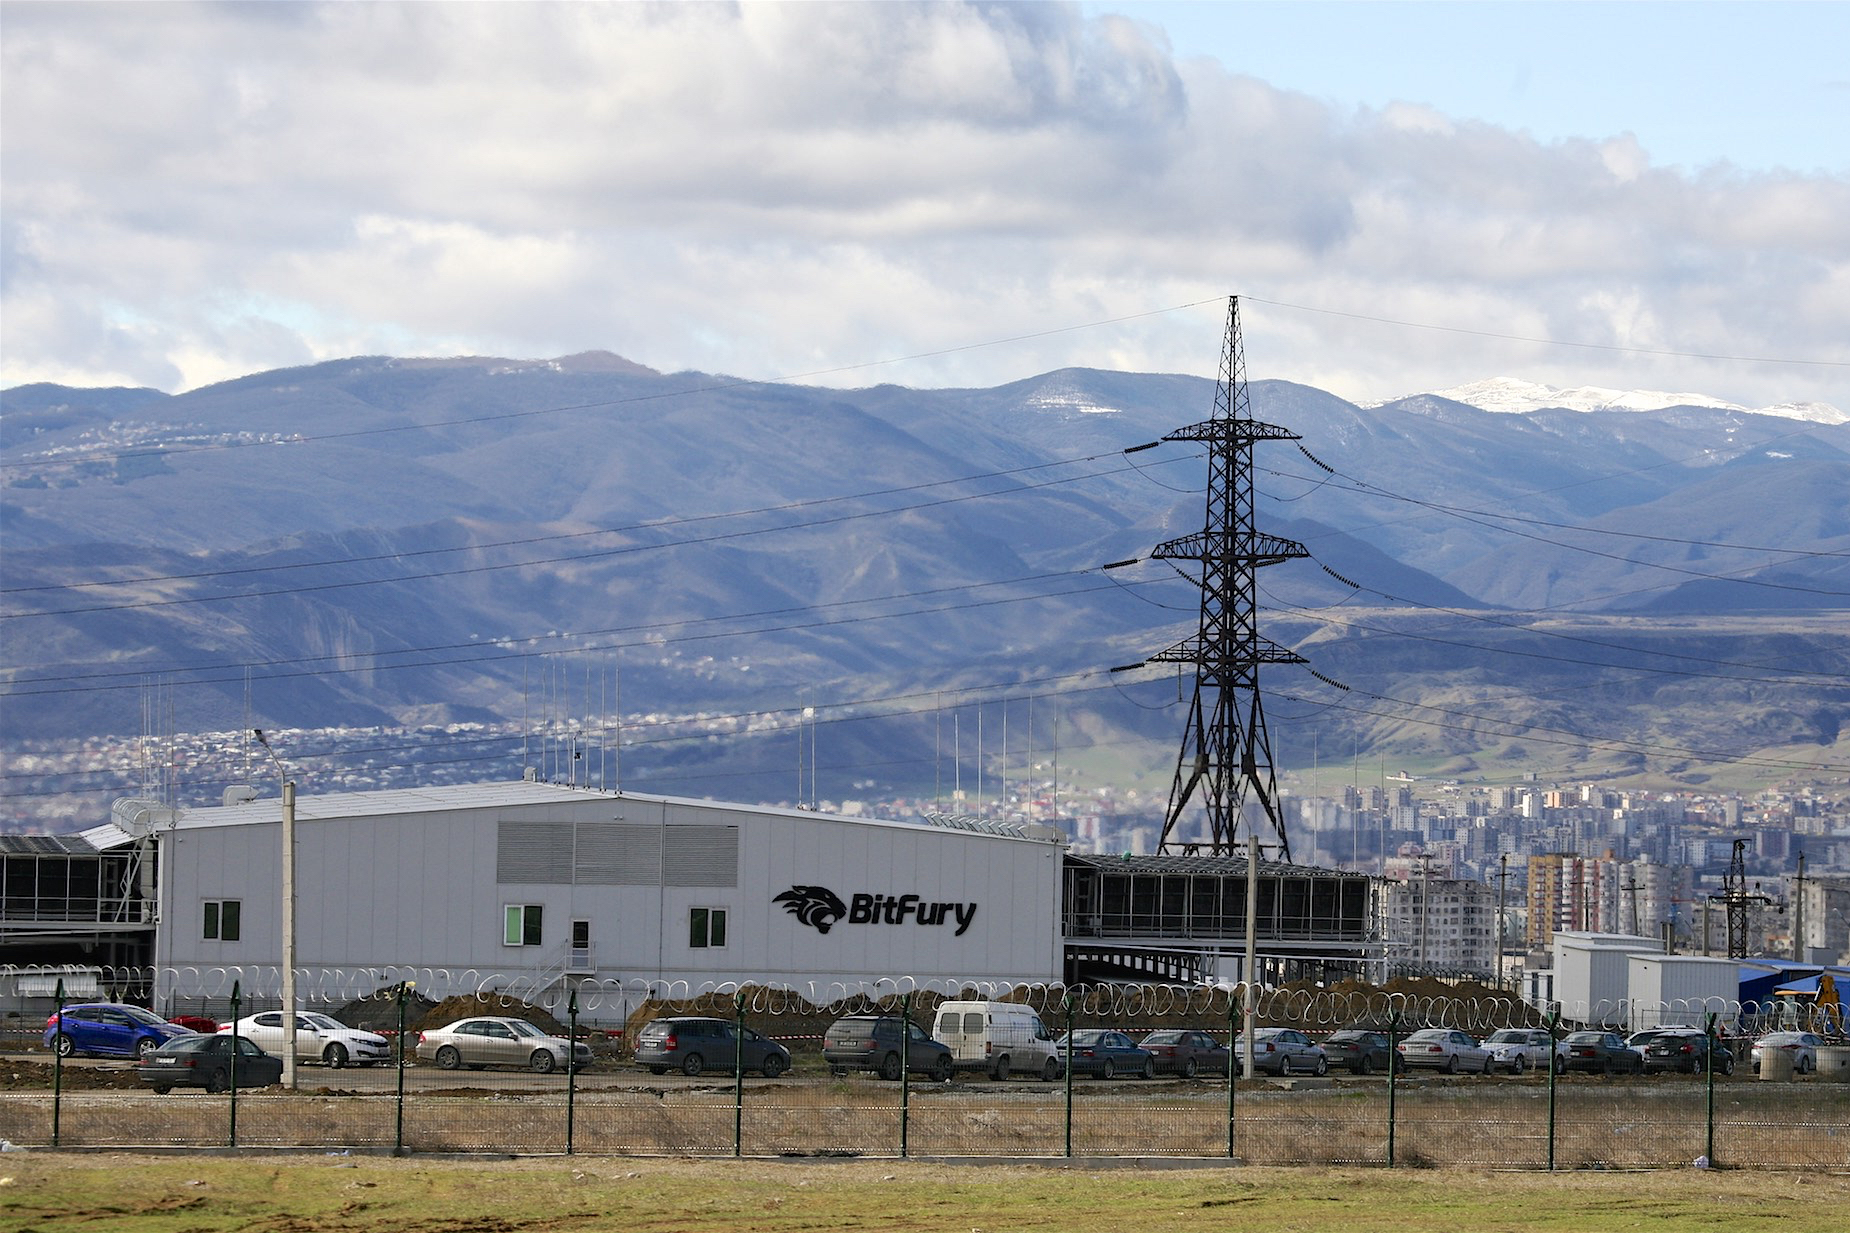 Bitfury’s facility in the outskirts of Tbilisi. Source: Andrew North for NPR